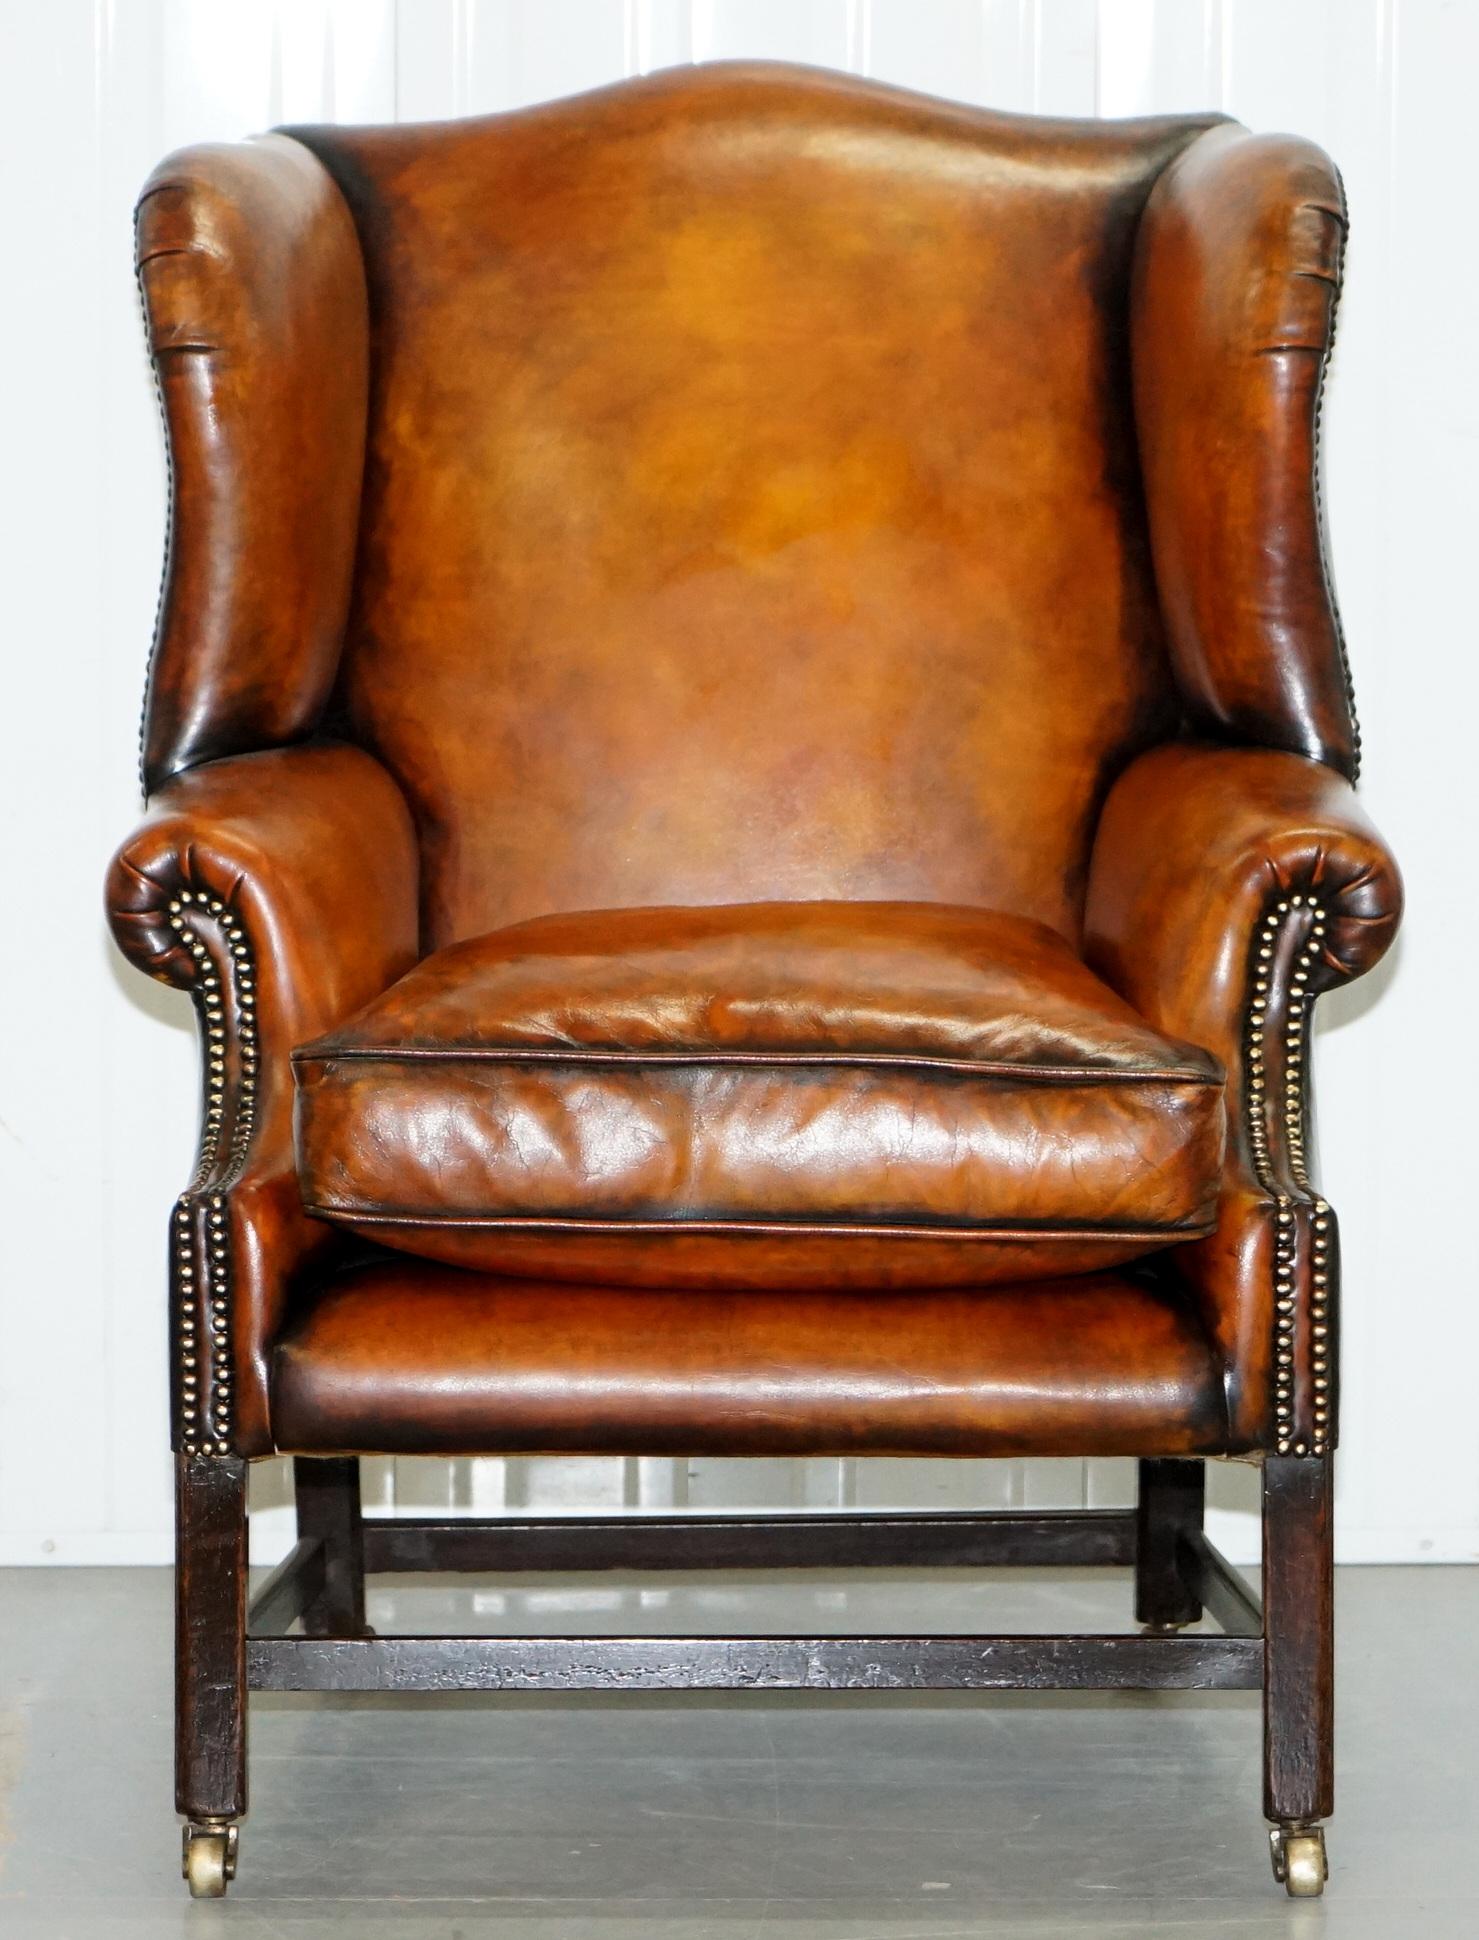 We are delighted to offer for sale this stunning and very rare fully restored George III circa 1780 wingback armchair.

A simply glorious piece, the frame has the traditional George III oversized wings and short arms, it is the exact right size,